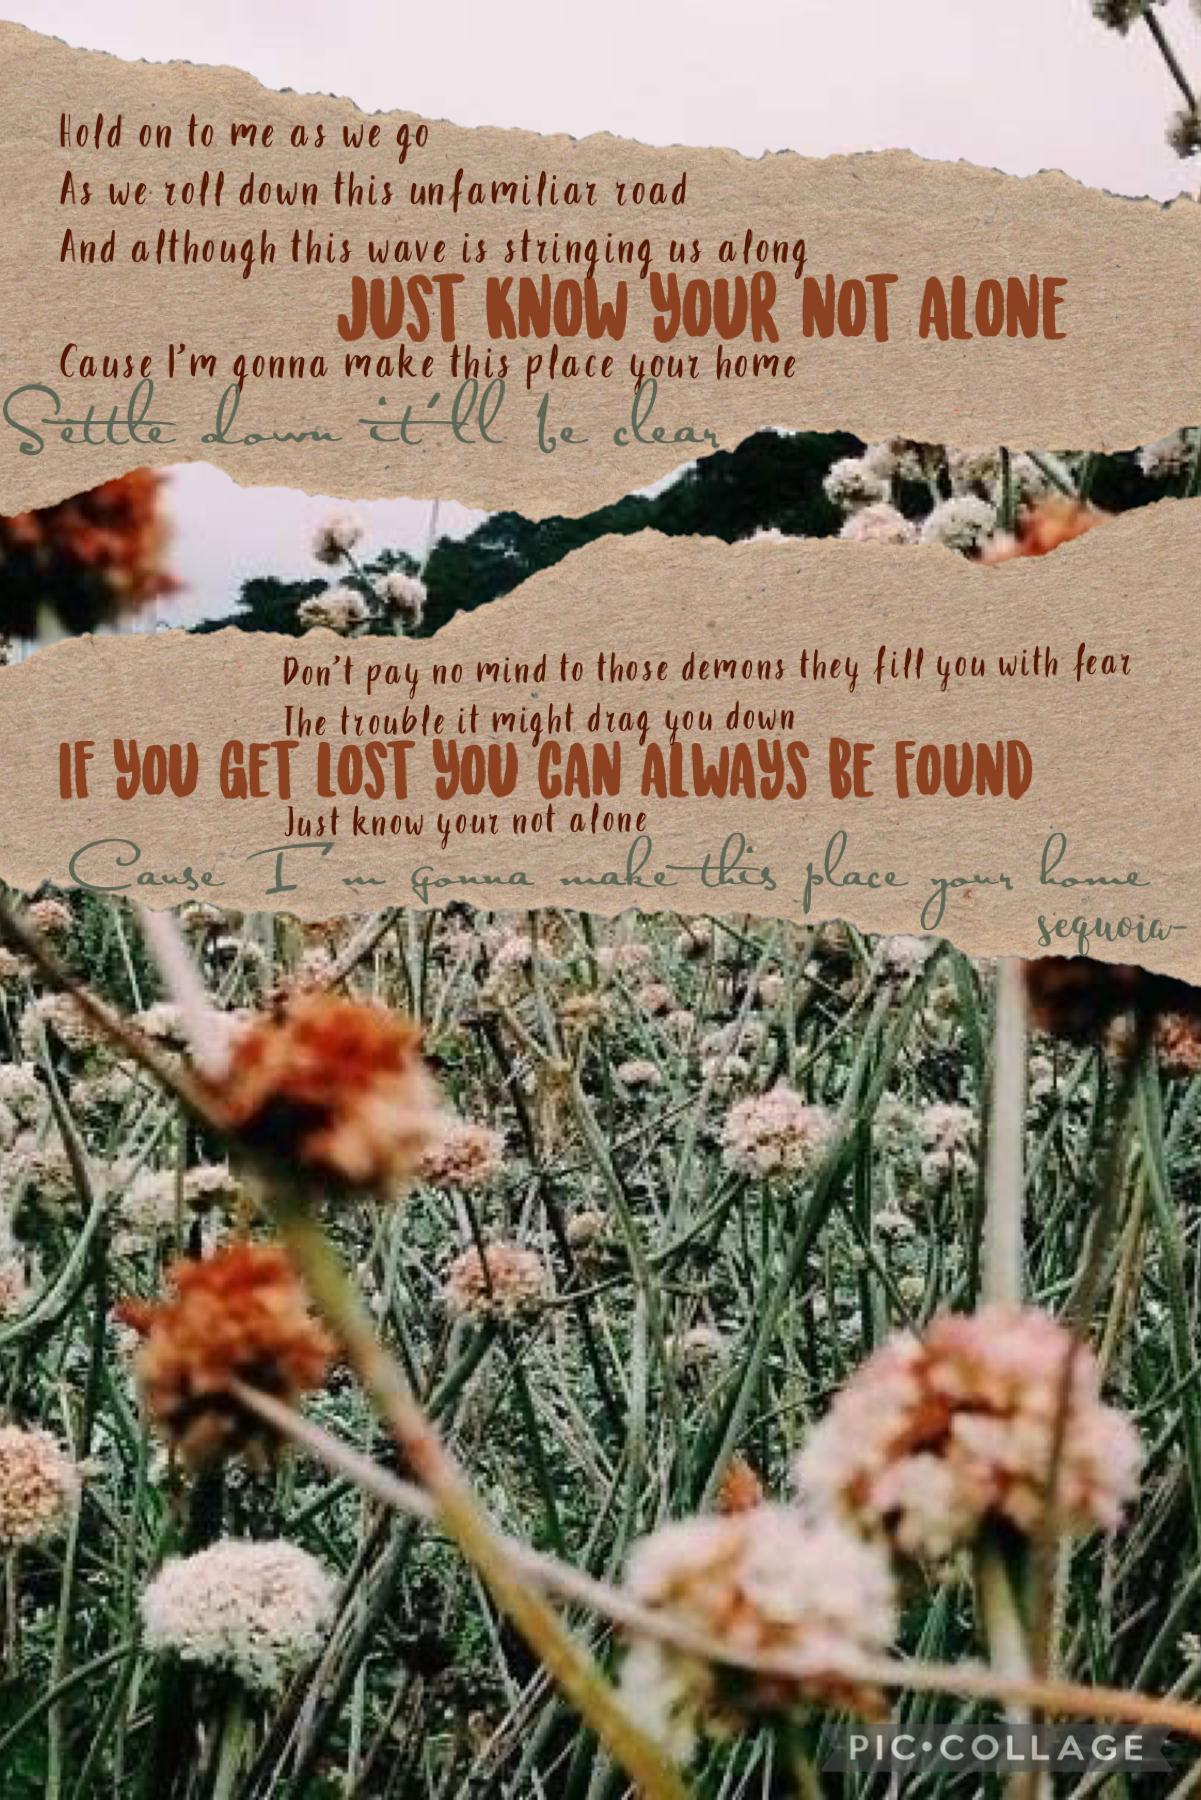 Lyrics to the 2012 song Home. The song was written and recorded along with being released by Philip Philips 